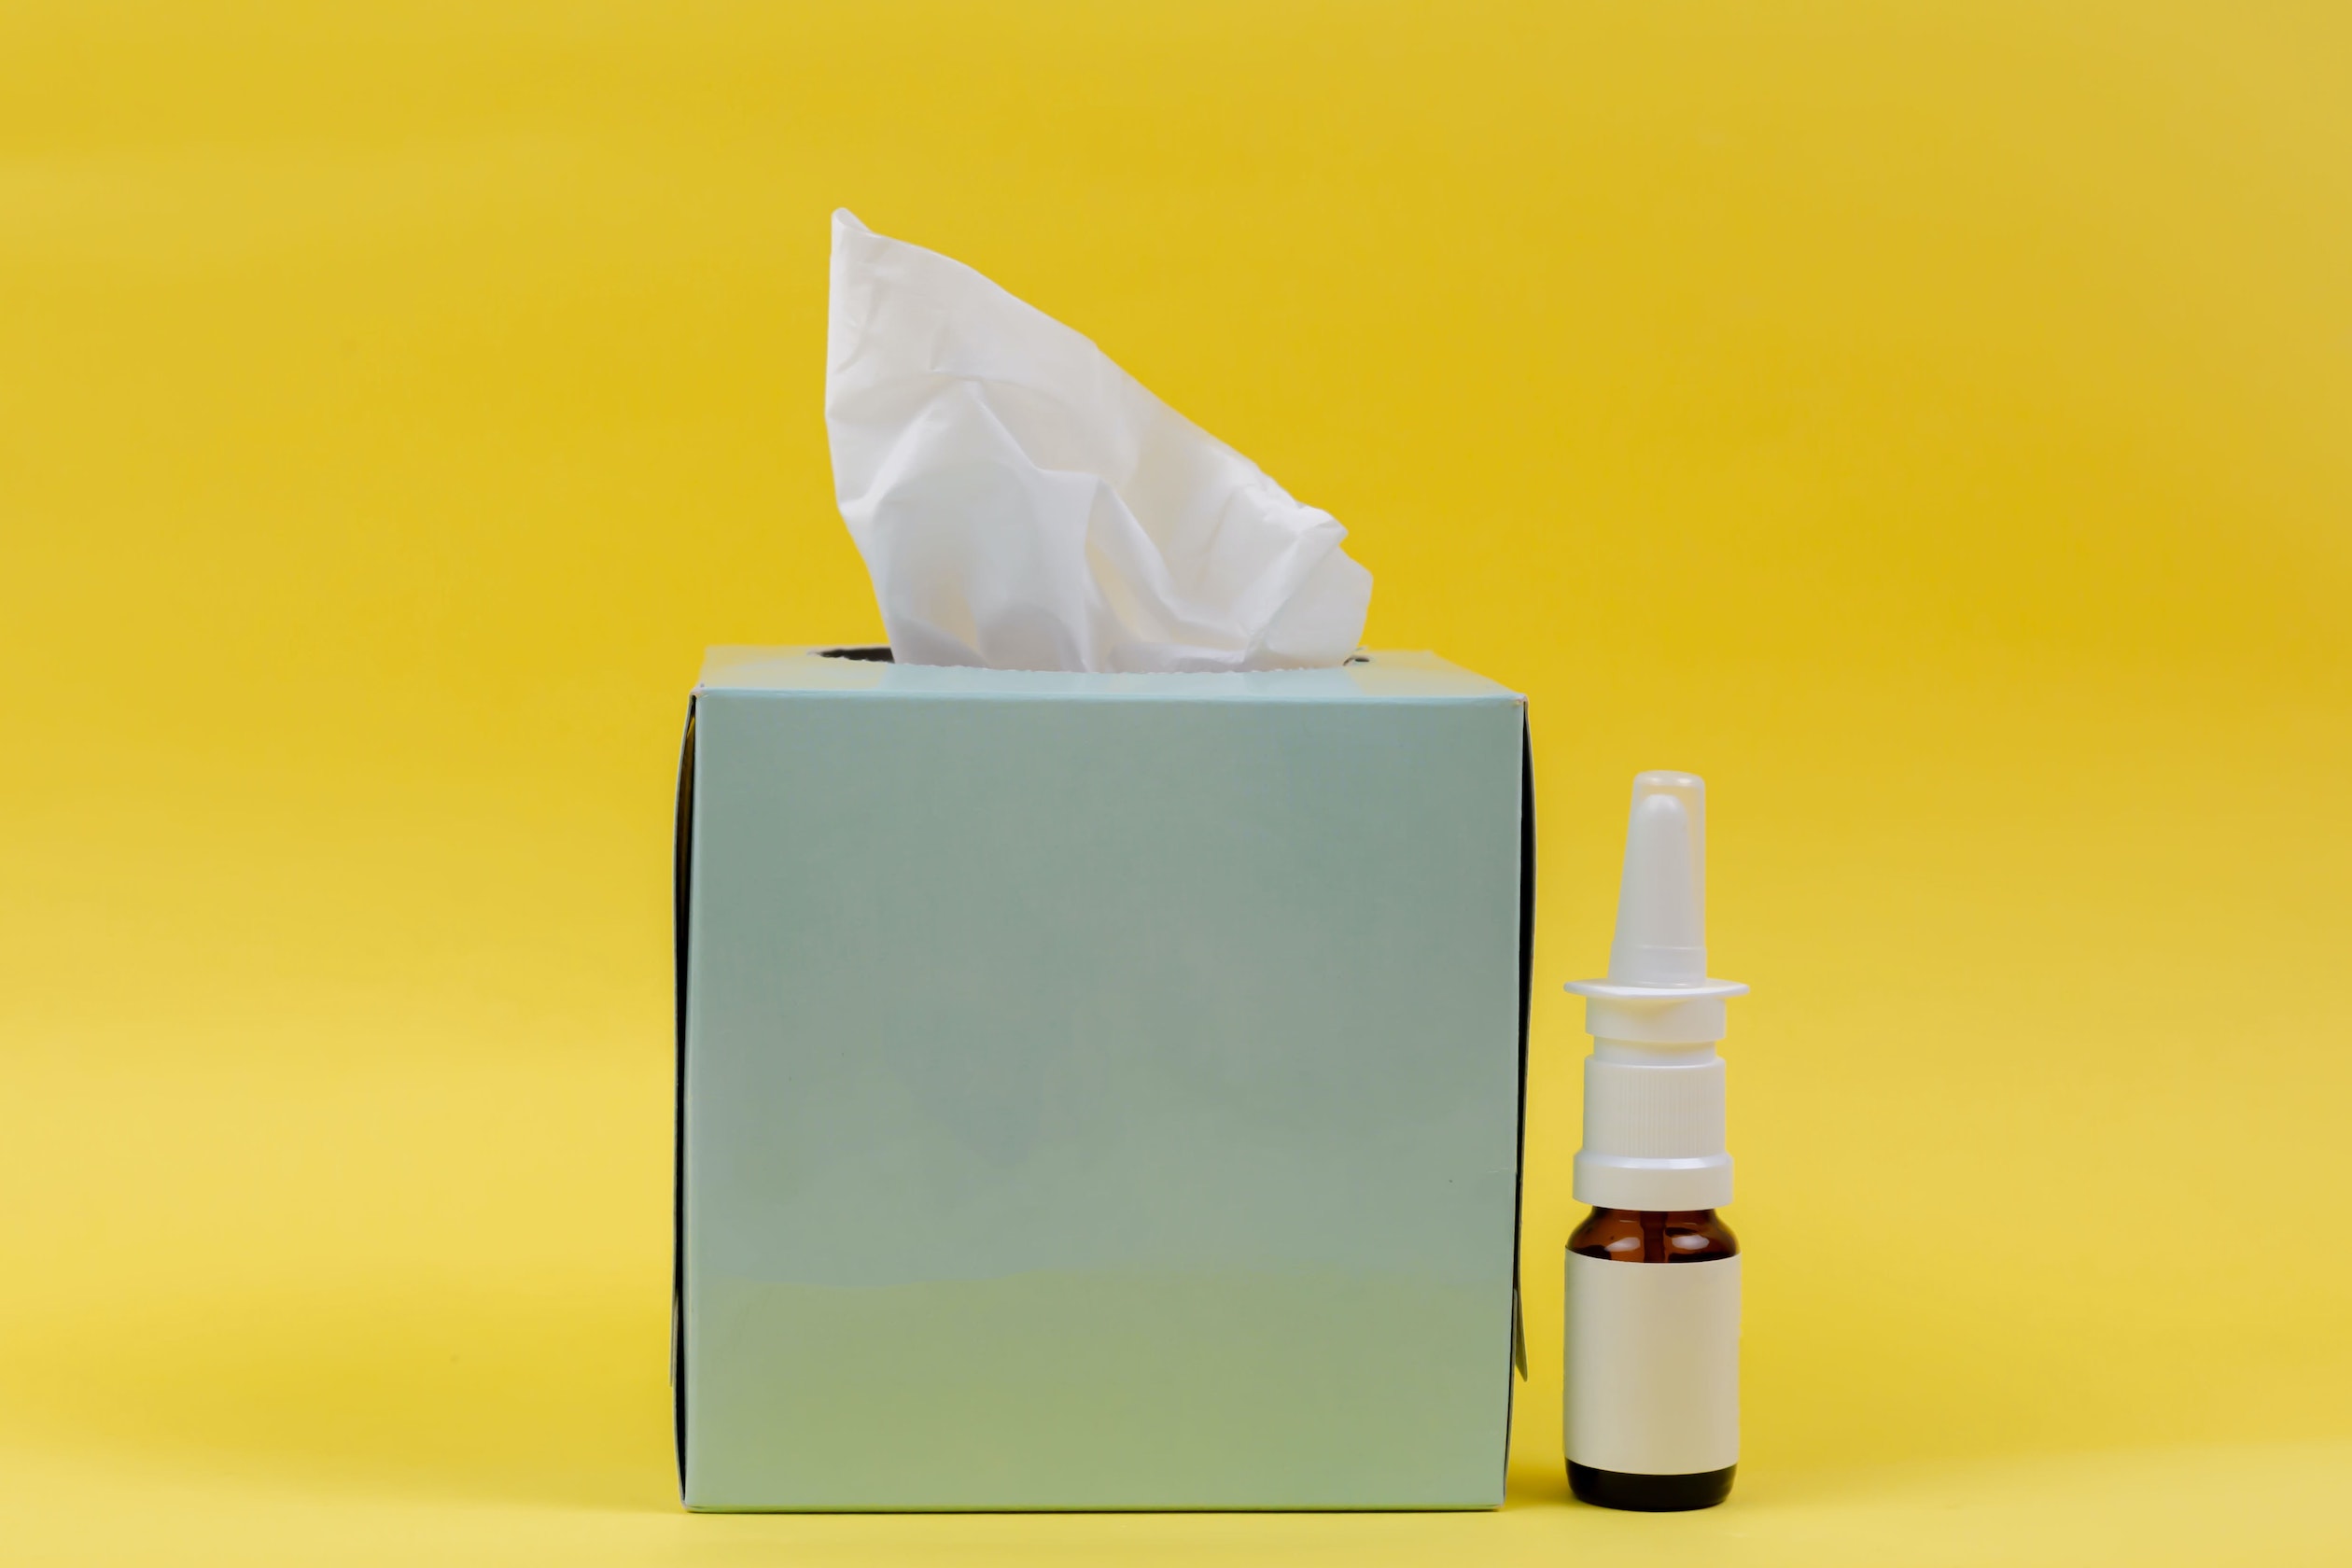 Photo of a box of tissues and a bottle of nasal spray in front of a bright background.